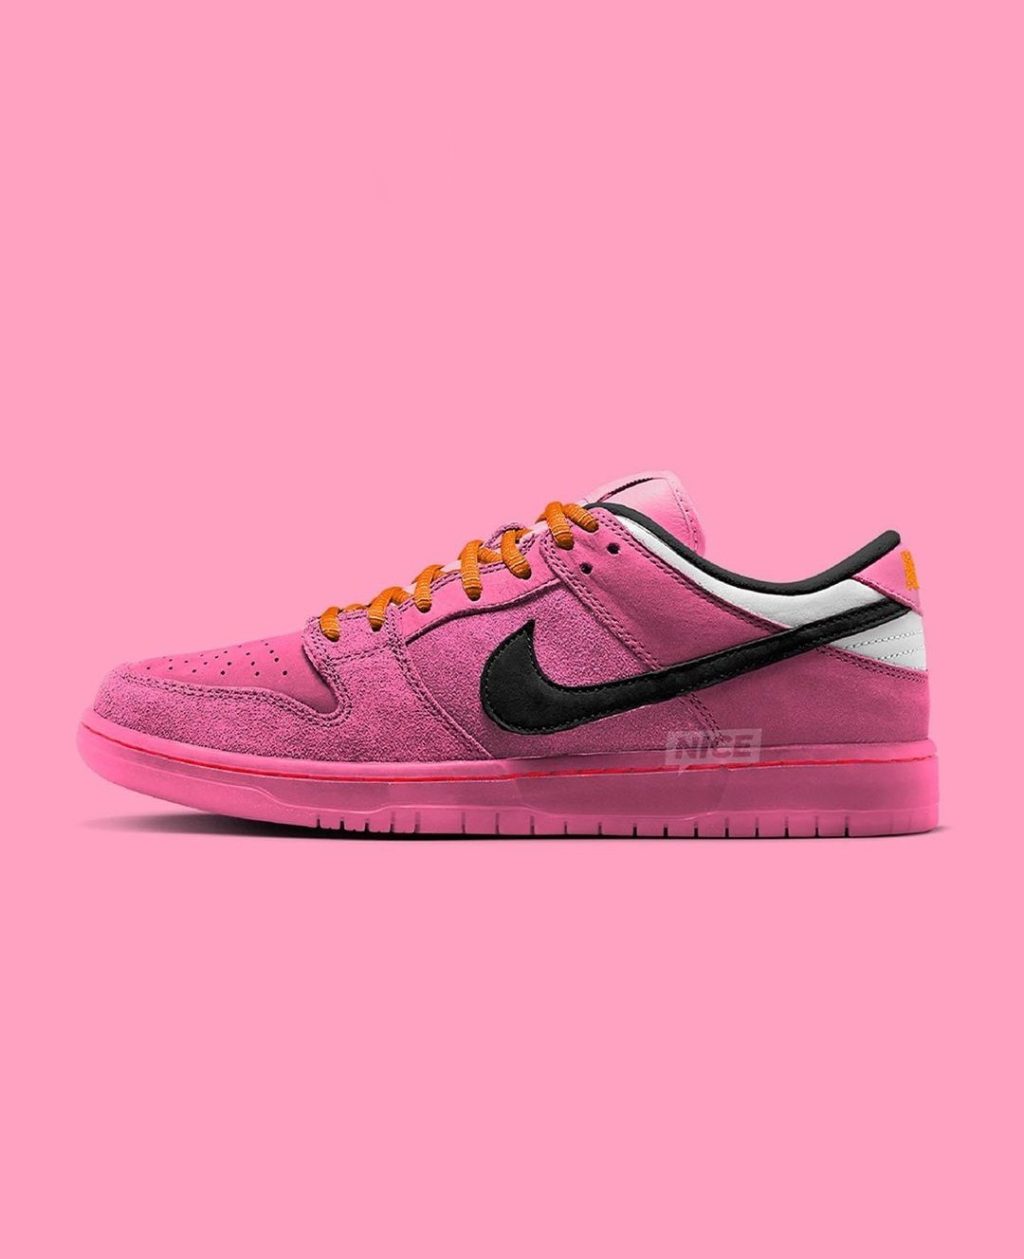 Powerpuff Girls x Nike SB Dunk Low Sneakers are Set to Be Released in ...